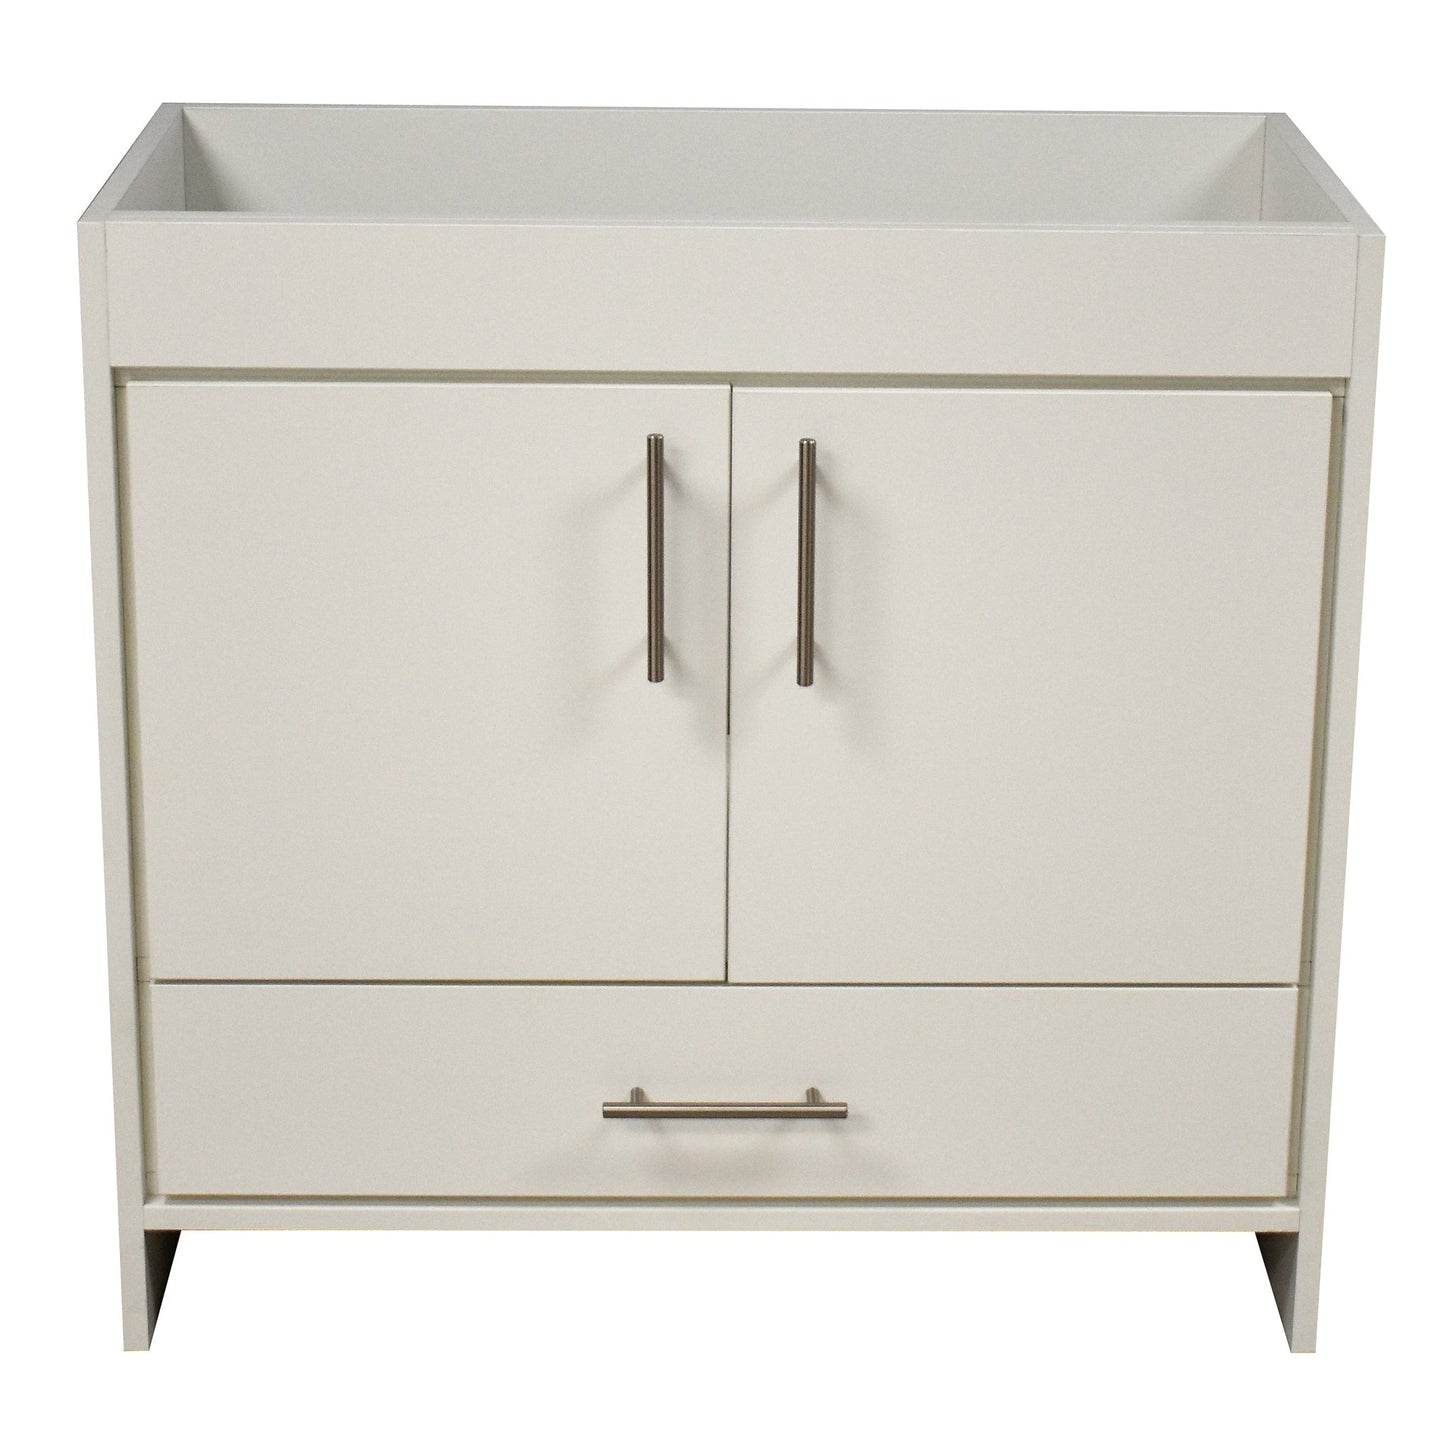 Volpa USA Pacific 36" Soft White Freestanding Modern Bathroom Vanity With Brushed Nickel Round Handles Cabinet Only